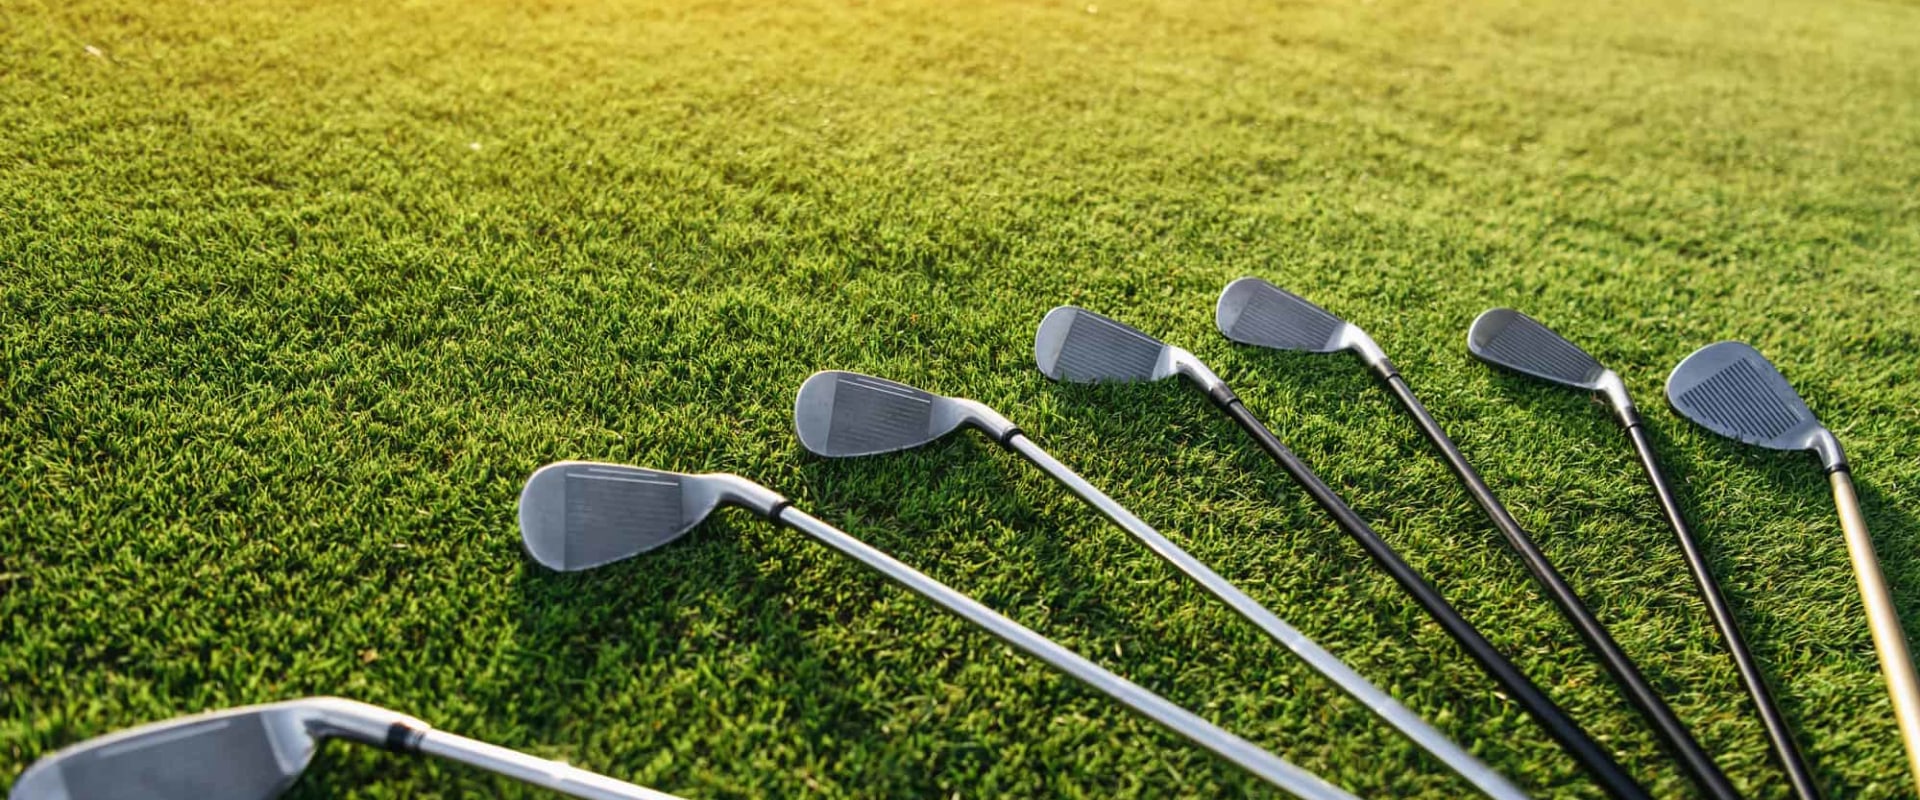 How Much Does a Full Bag of Golf Clubs Cost? A Comprehensive Guide